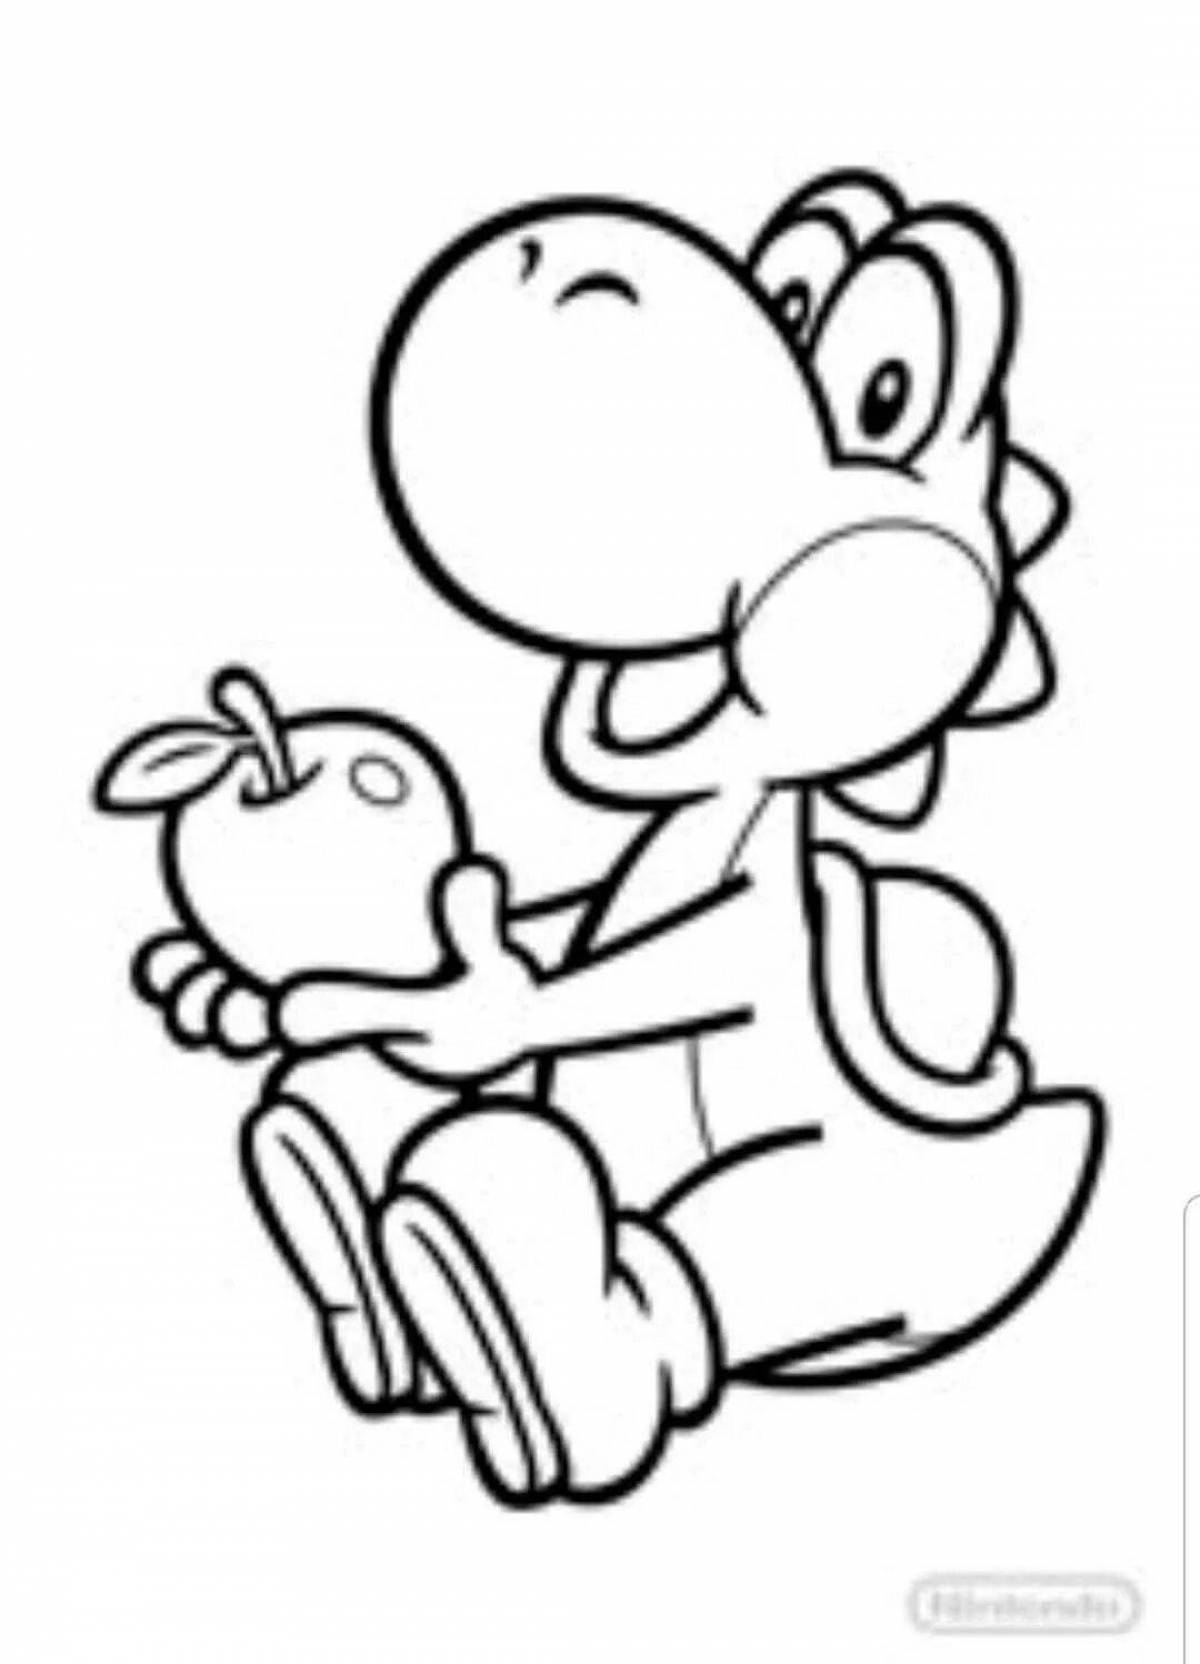 Yoshi and lana's thrilling coloring book